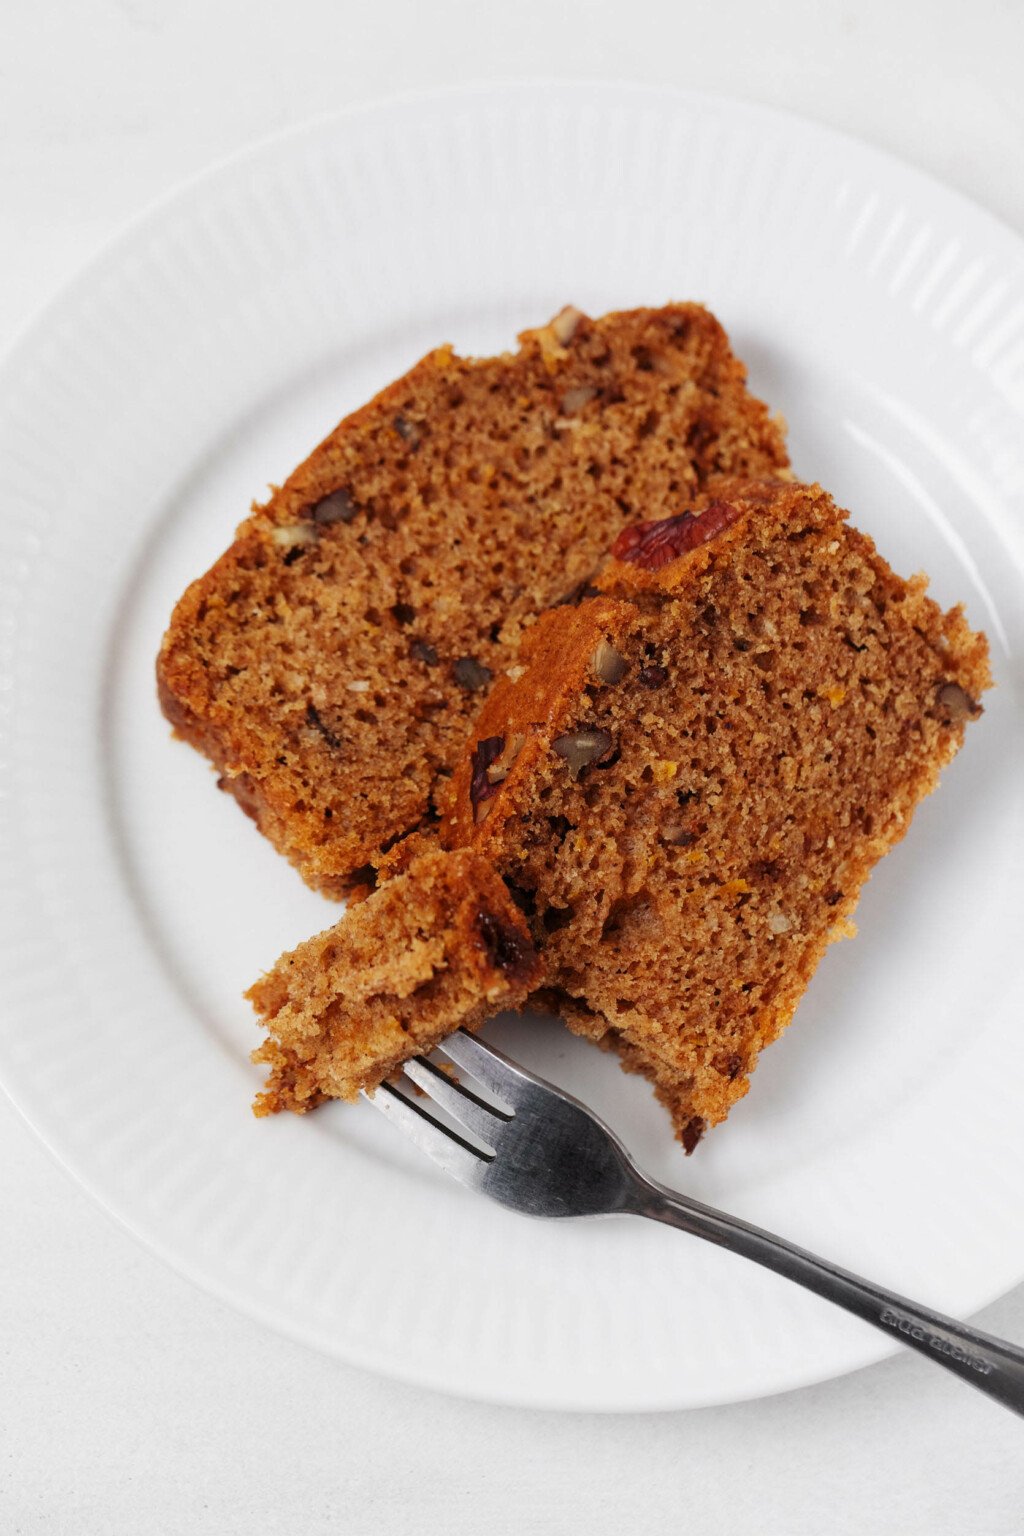 A moist, fluffy vegan pecan citrus loaf has been sliced and plated. A fork is being used to cut into one slice. 